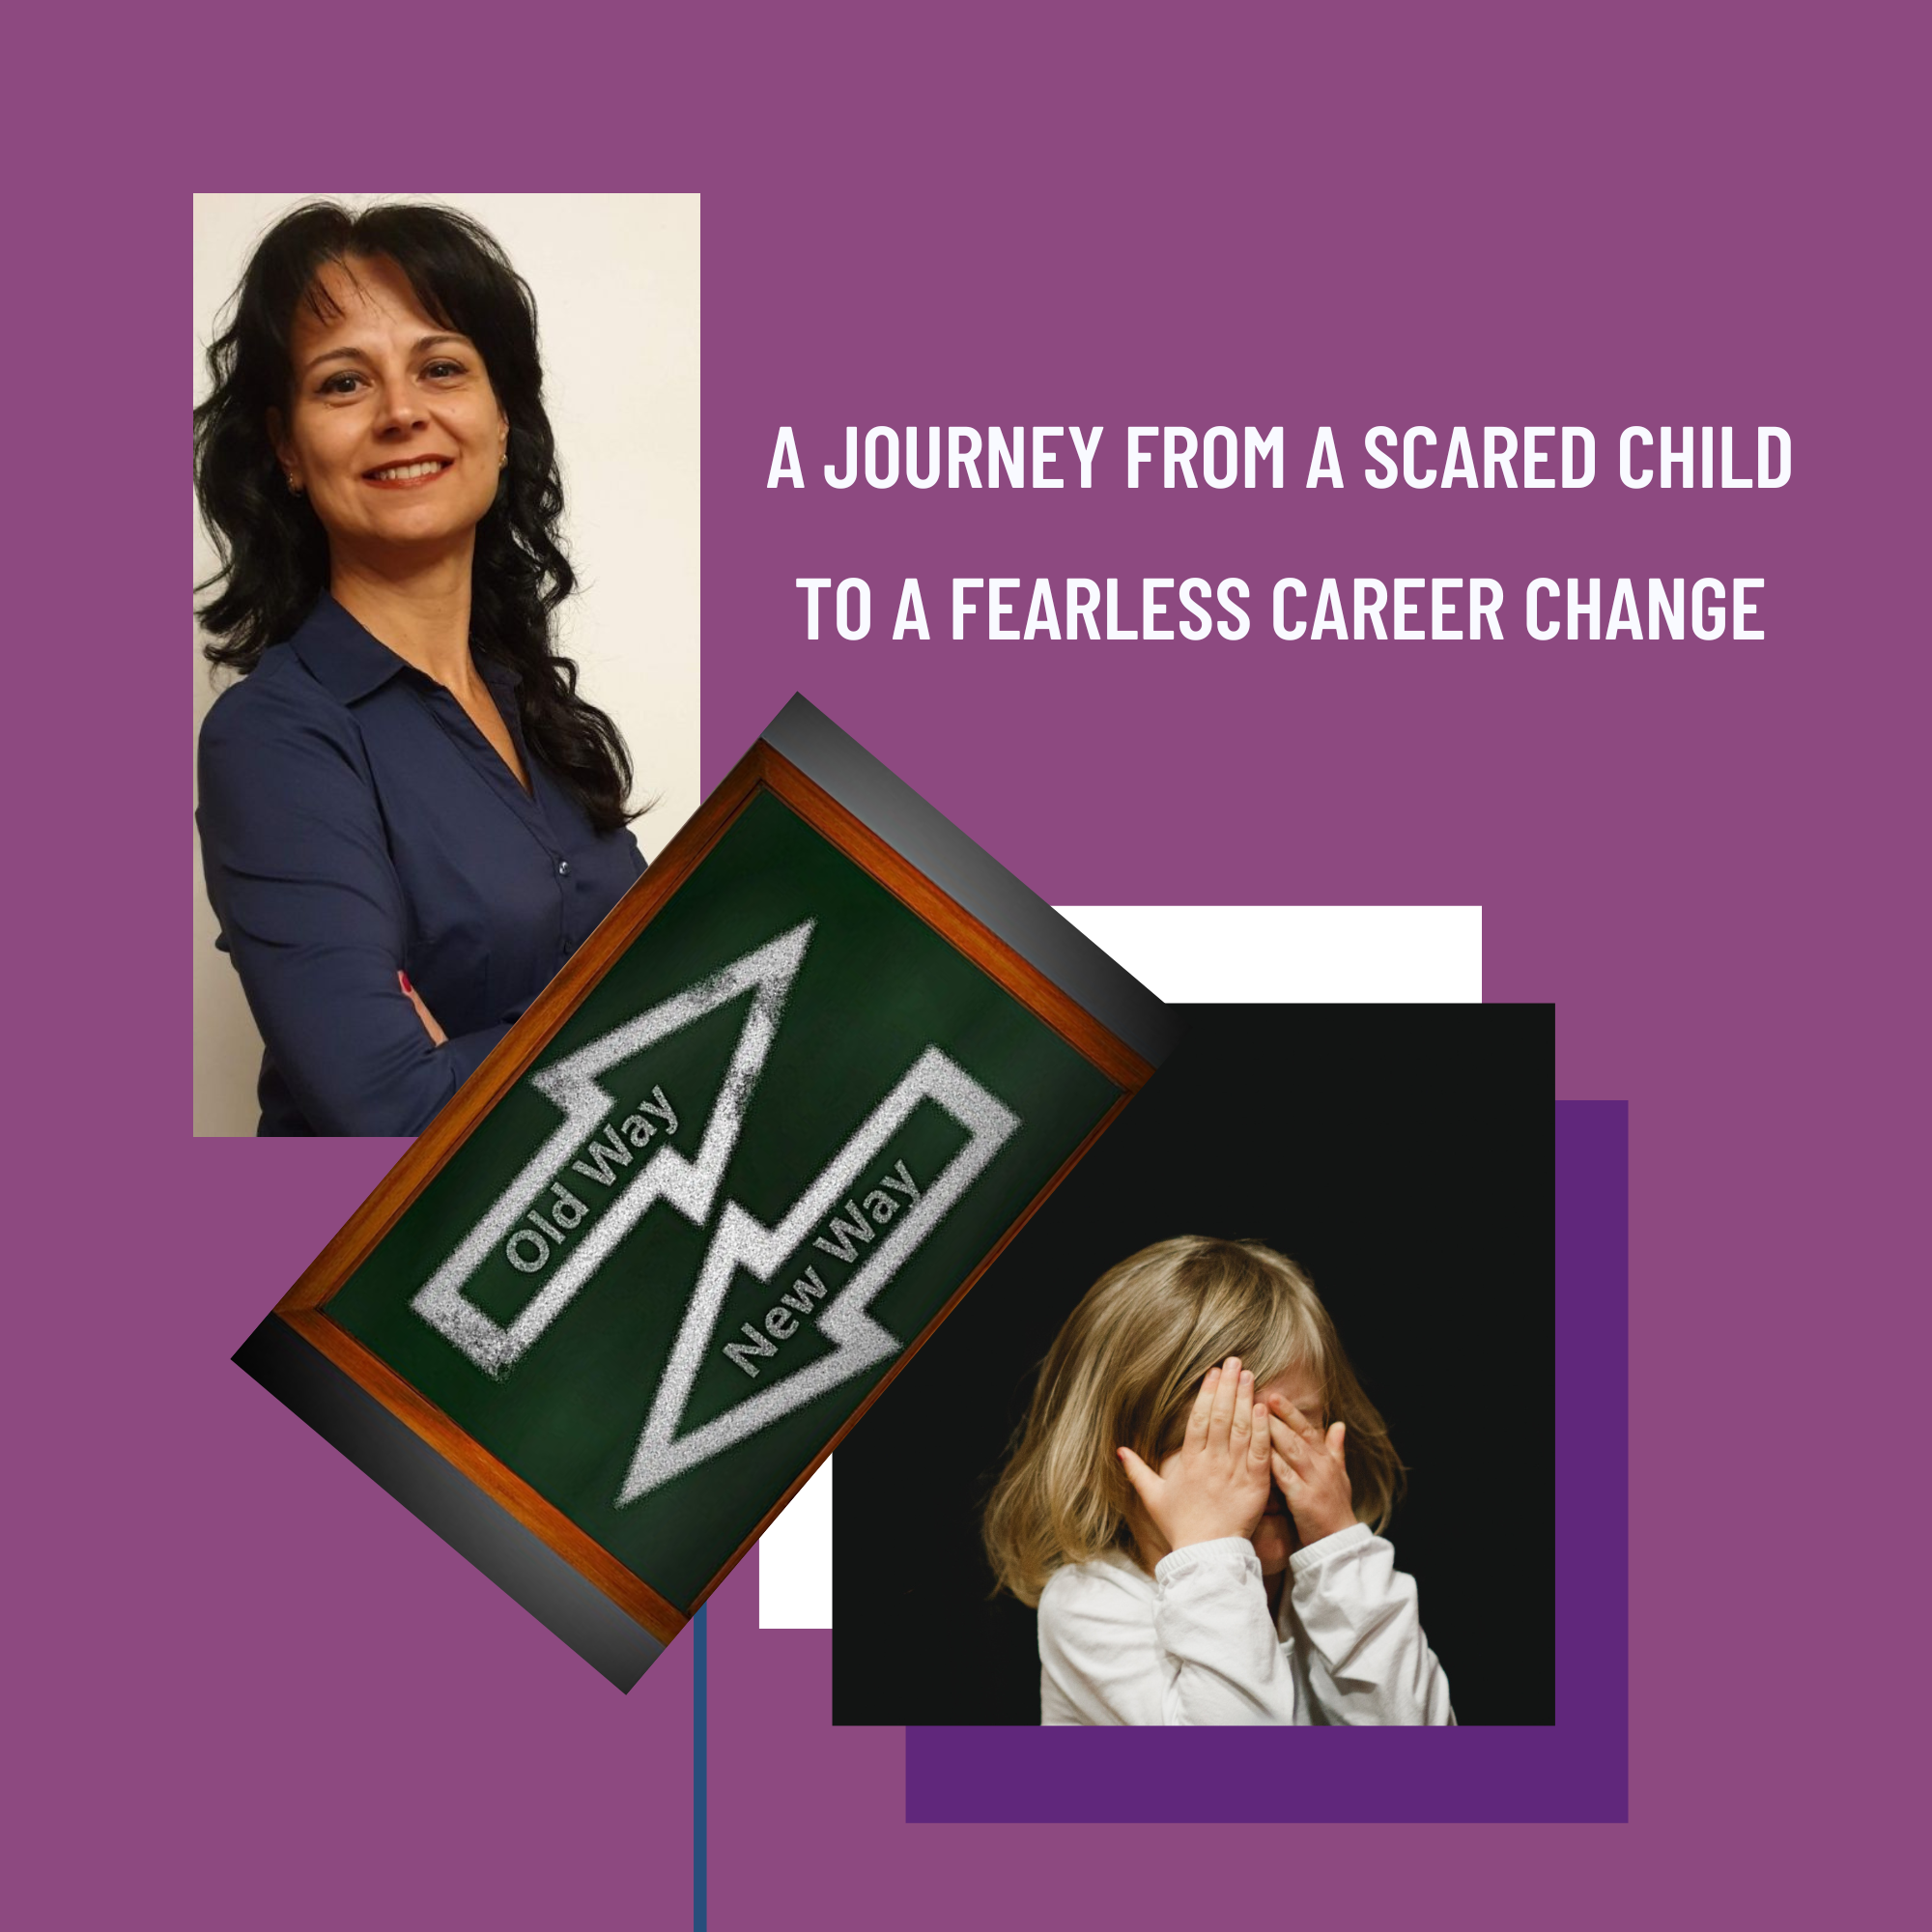 A Journey from a Scared Child to a Fearless Career Change